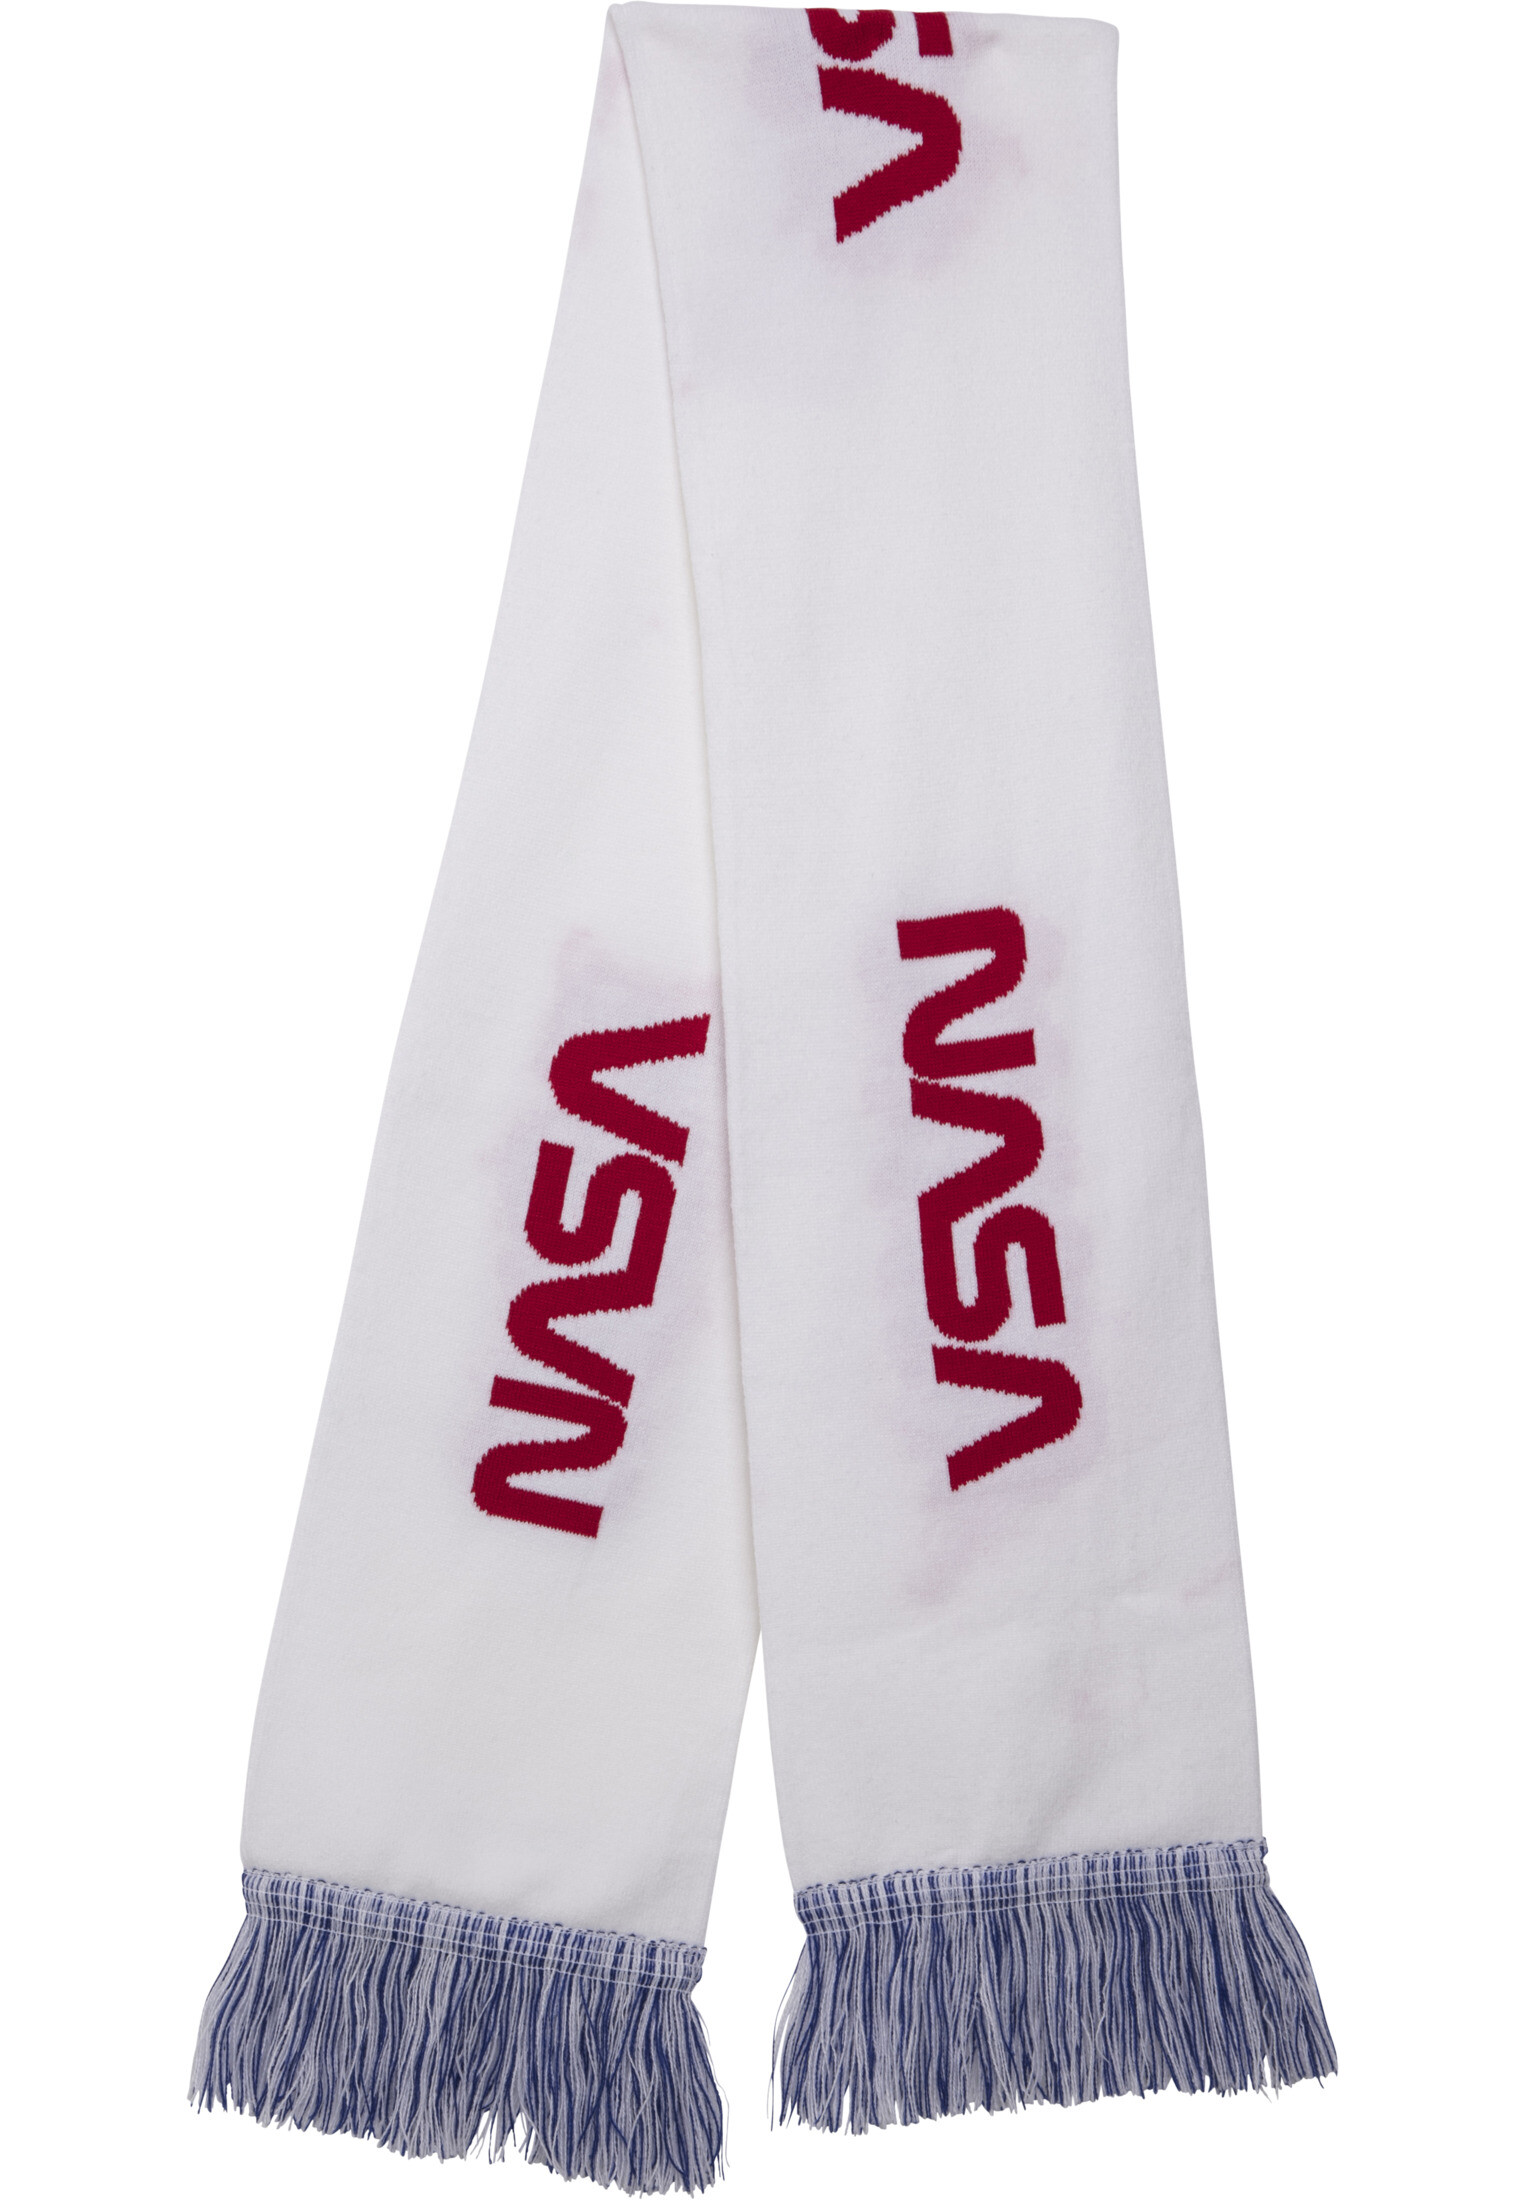 NASA scarf Knitted wht/blue/red